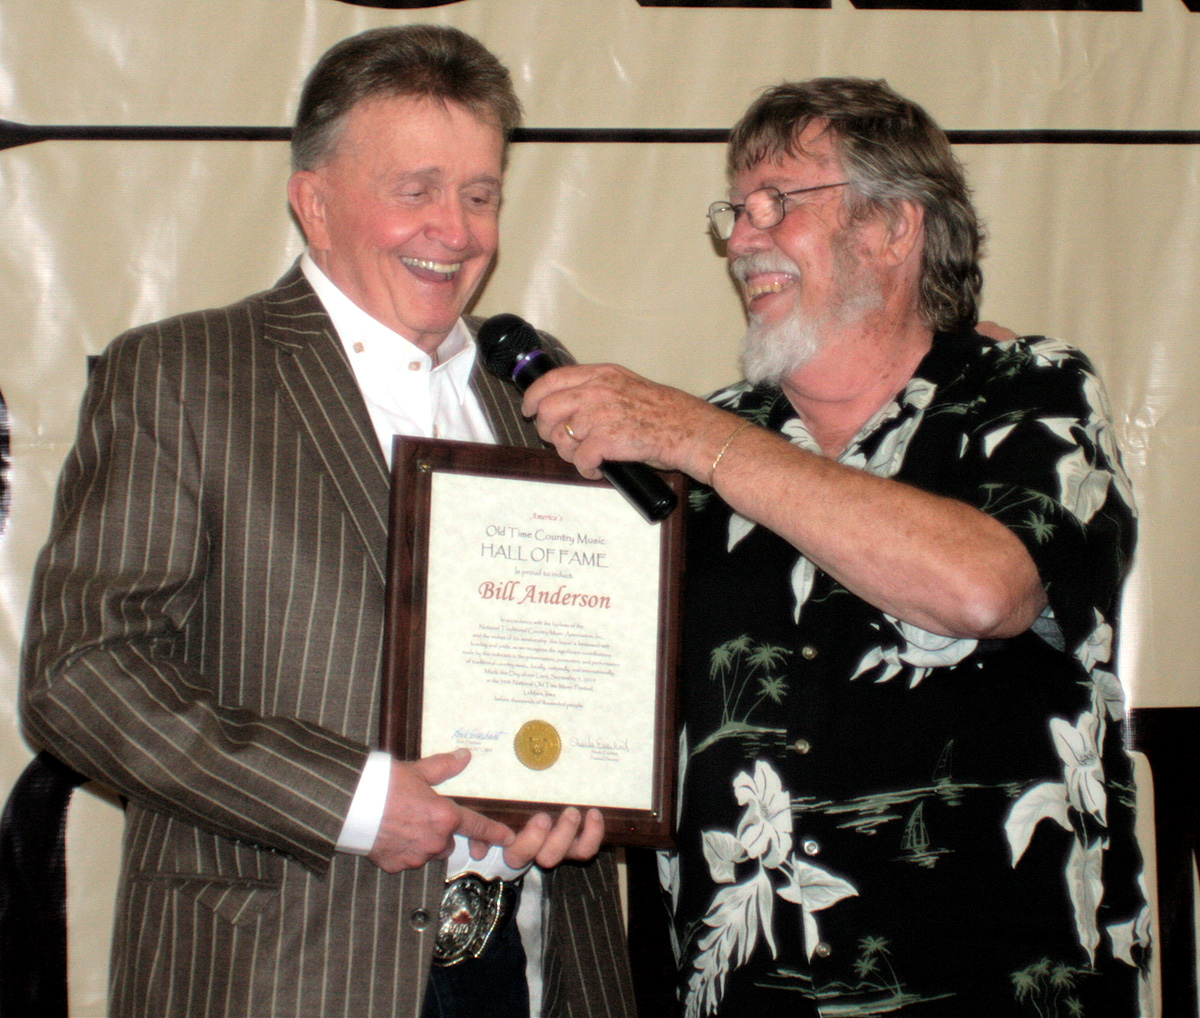 Bill Anderson receives an induction plaque from NTCMA